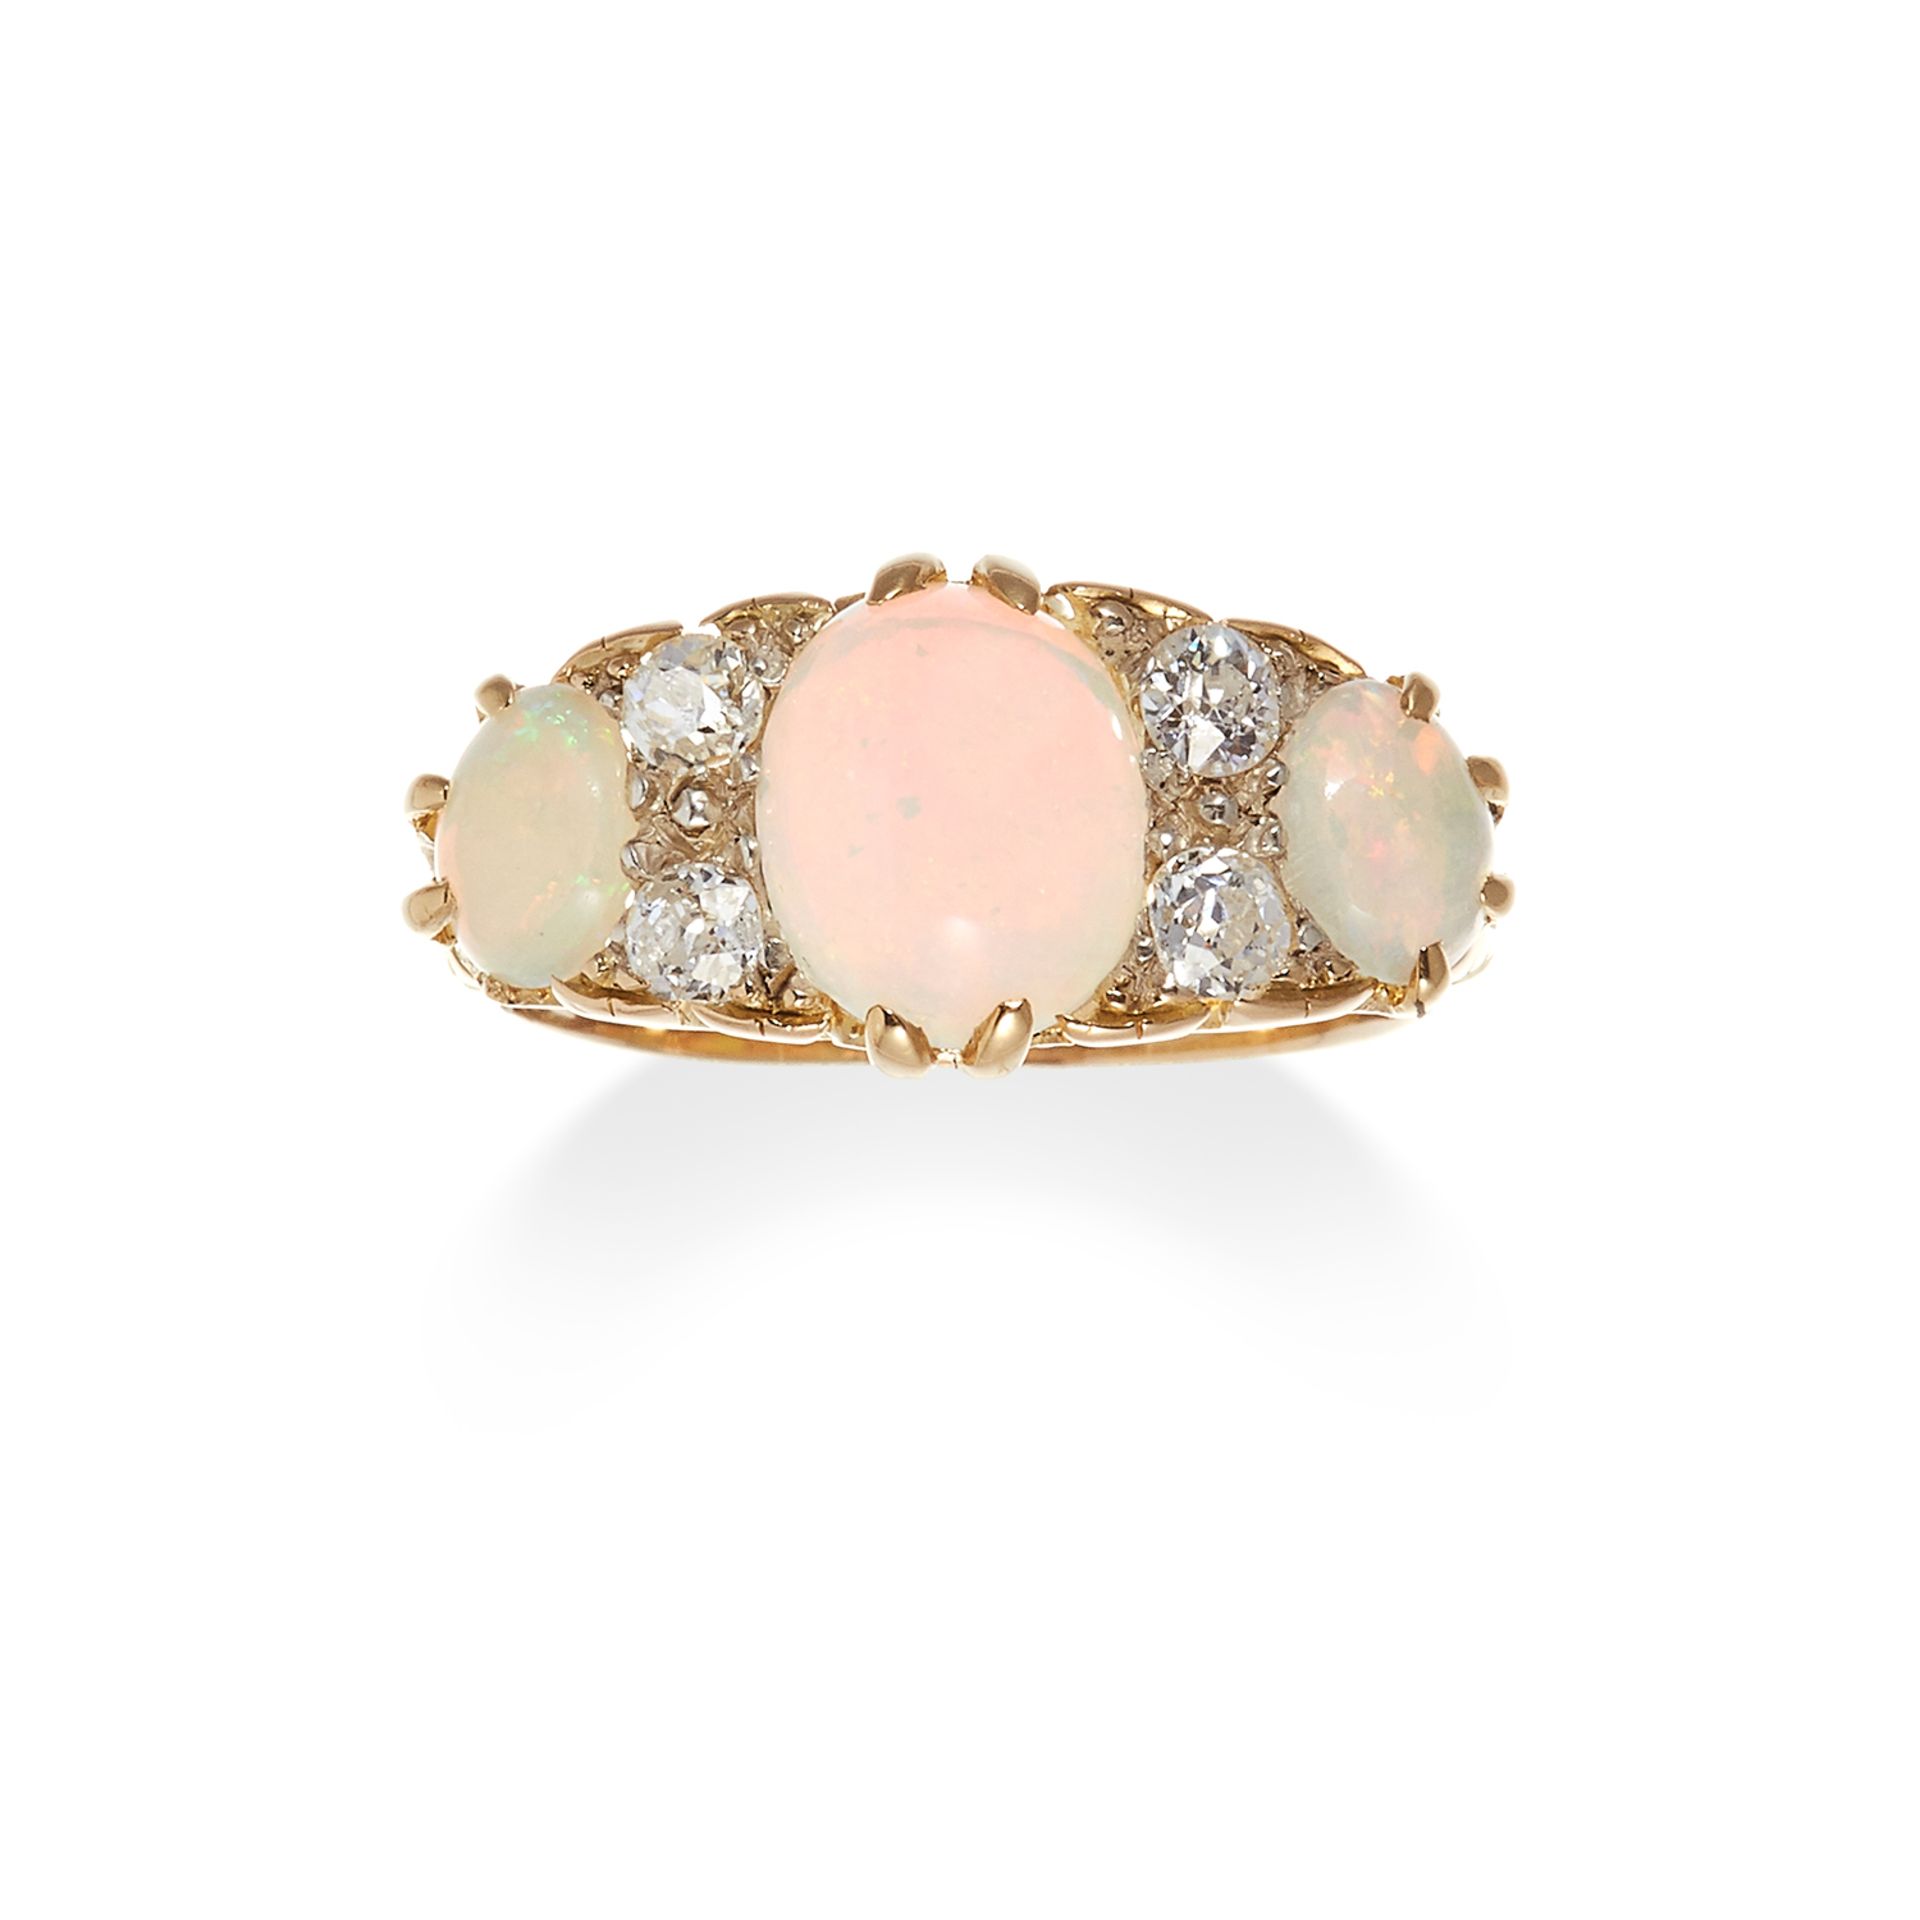 AN ANTIQUE OPAL AND DIAMOND RING in 18ct yellow gold, set with a trio of graduated oval cabochon